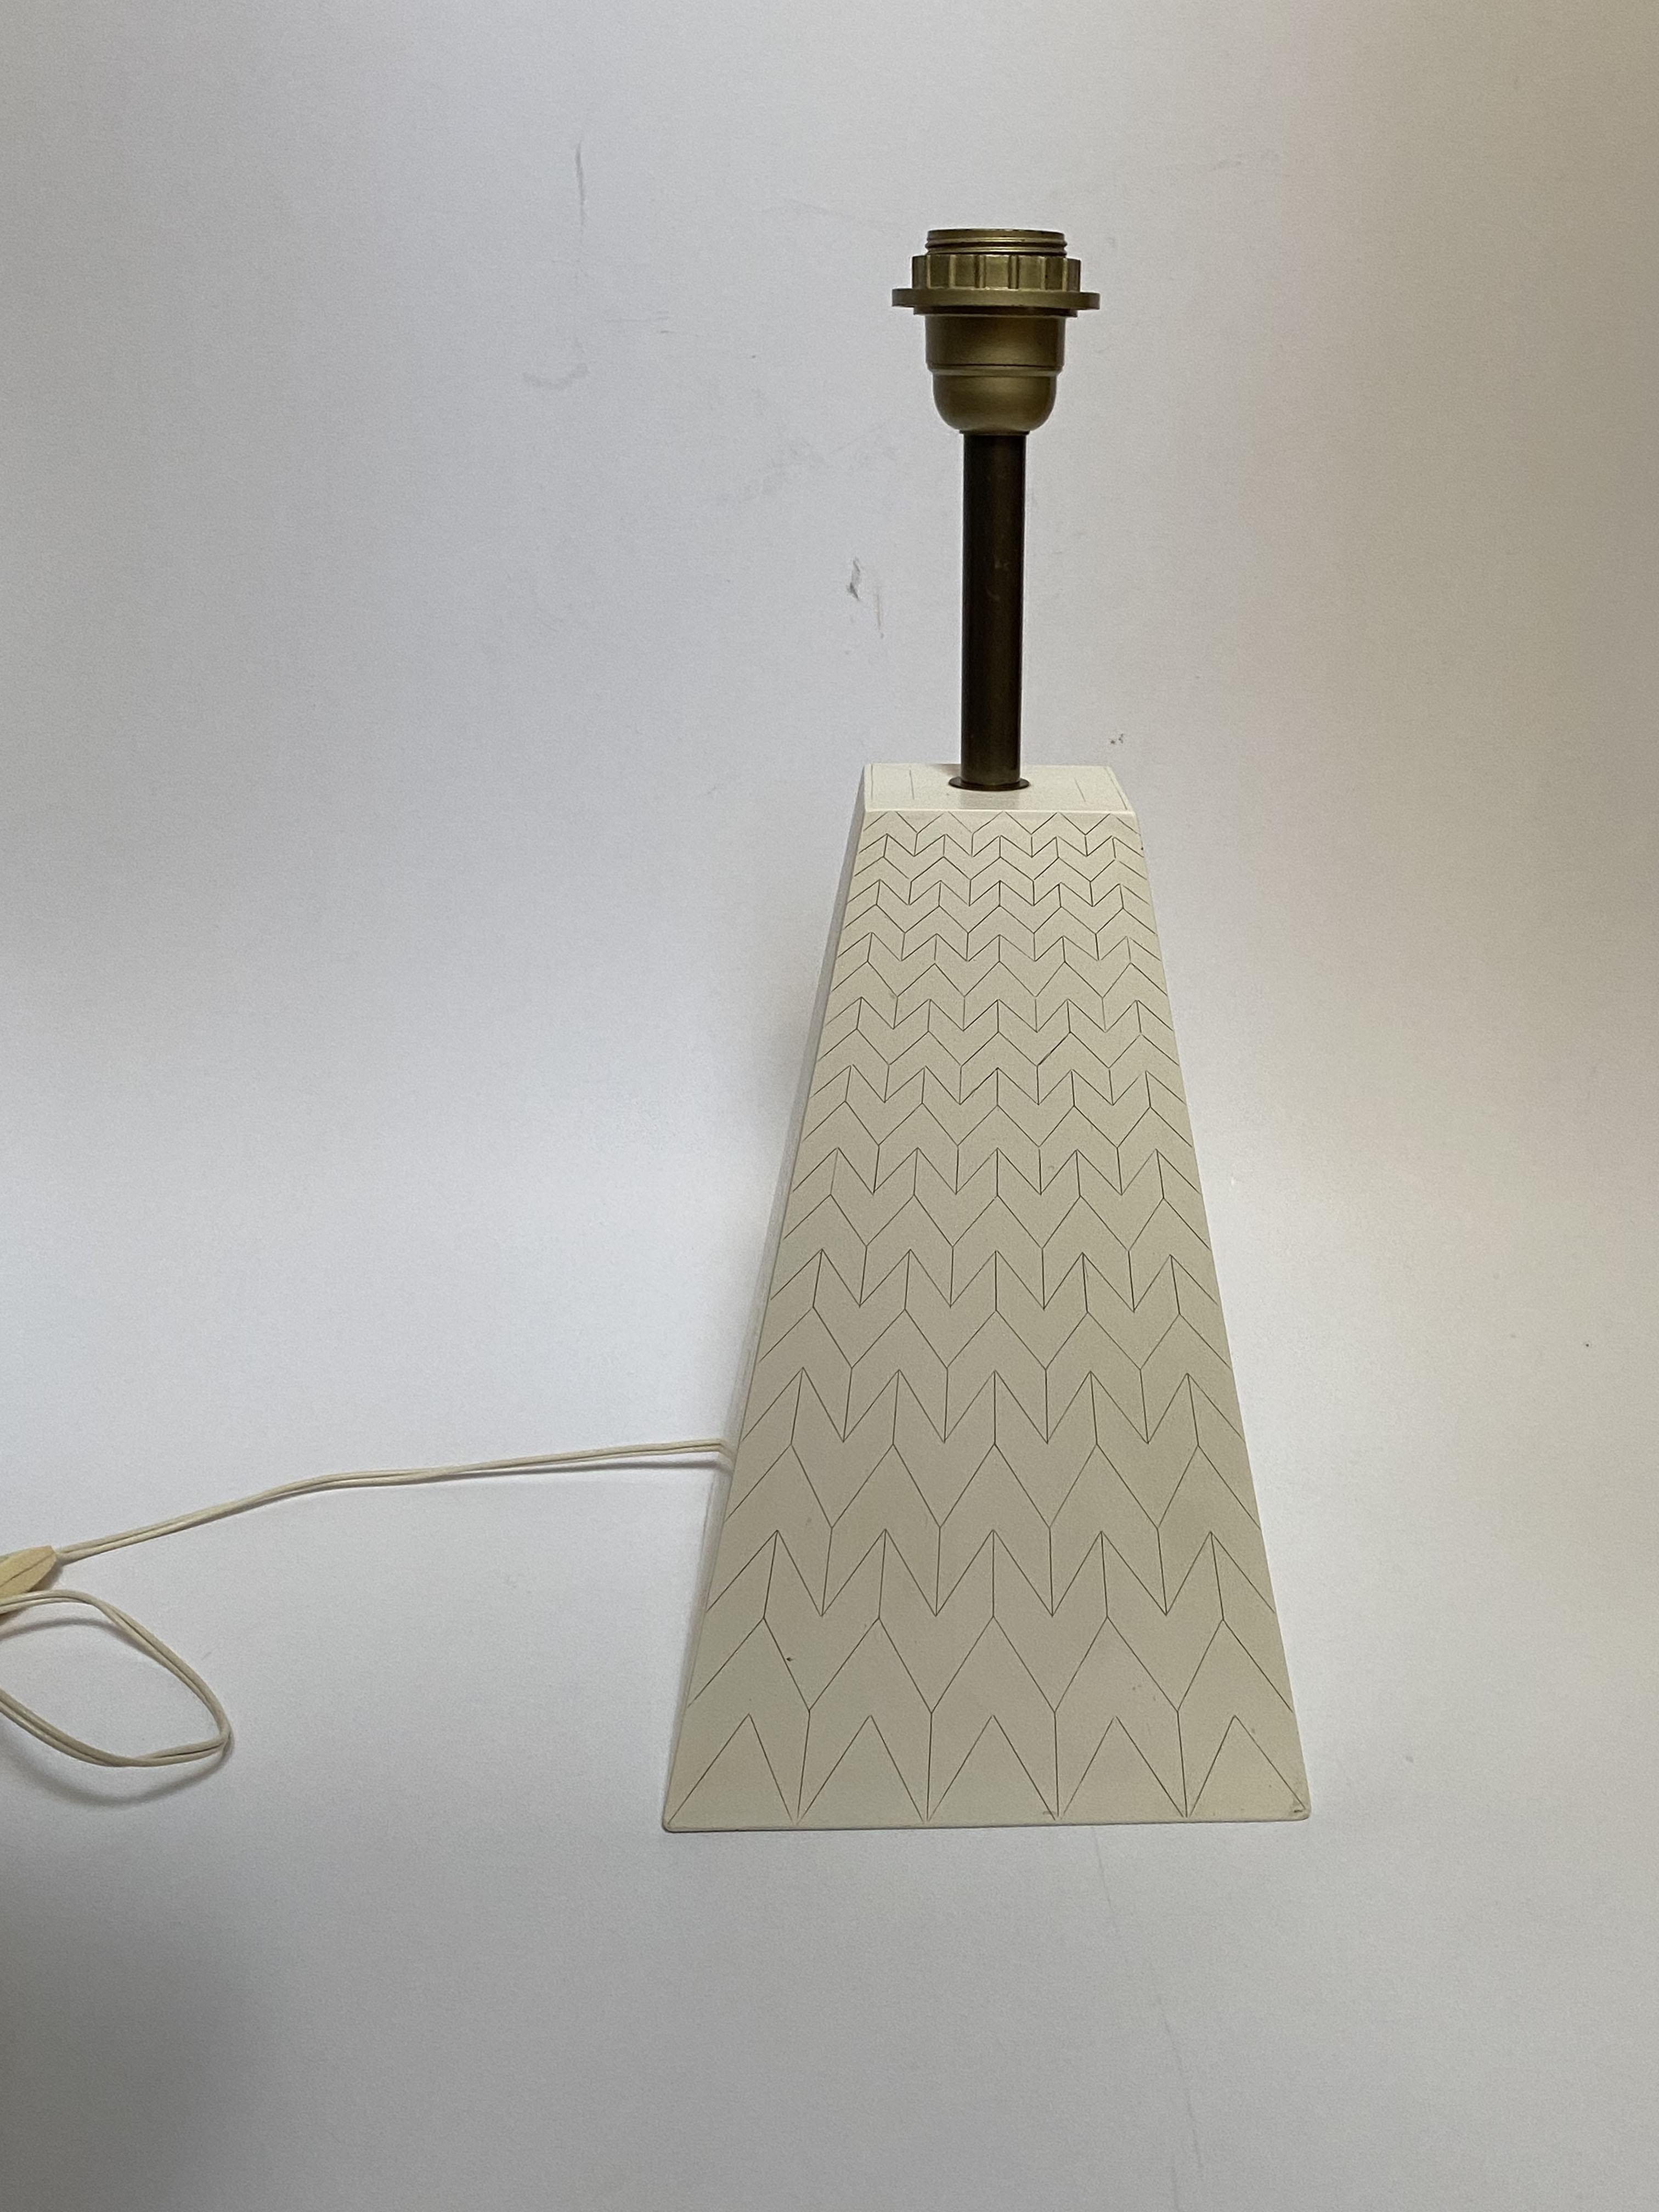 Obelisk or pyramid Lamp in false eggshell marquetry in the style of Jansen and Charles.